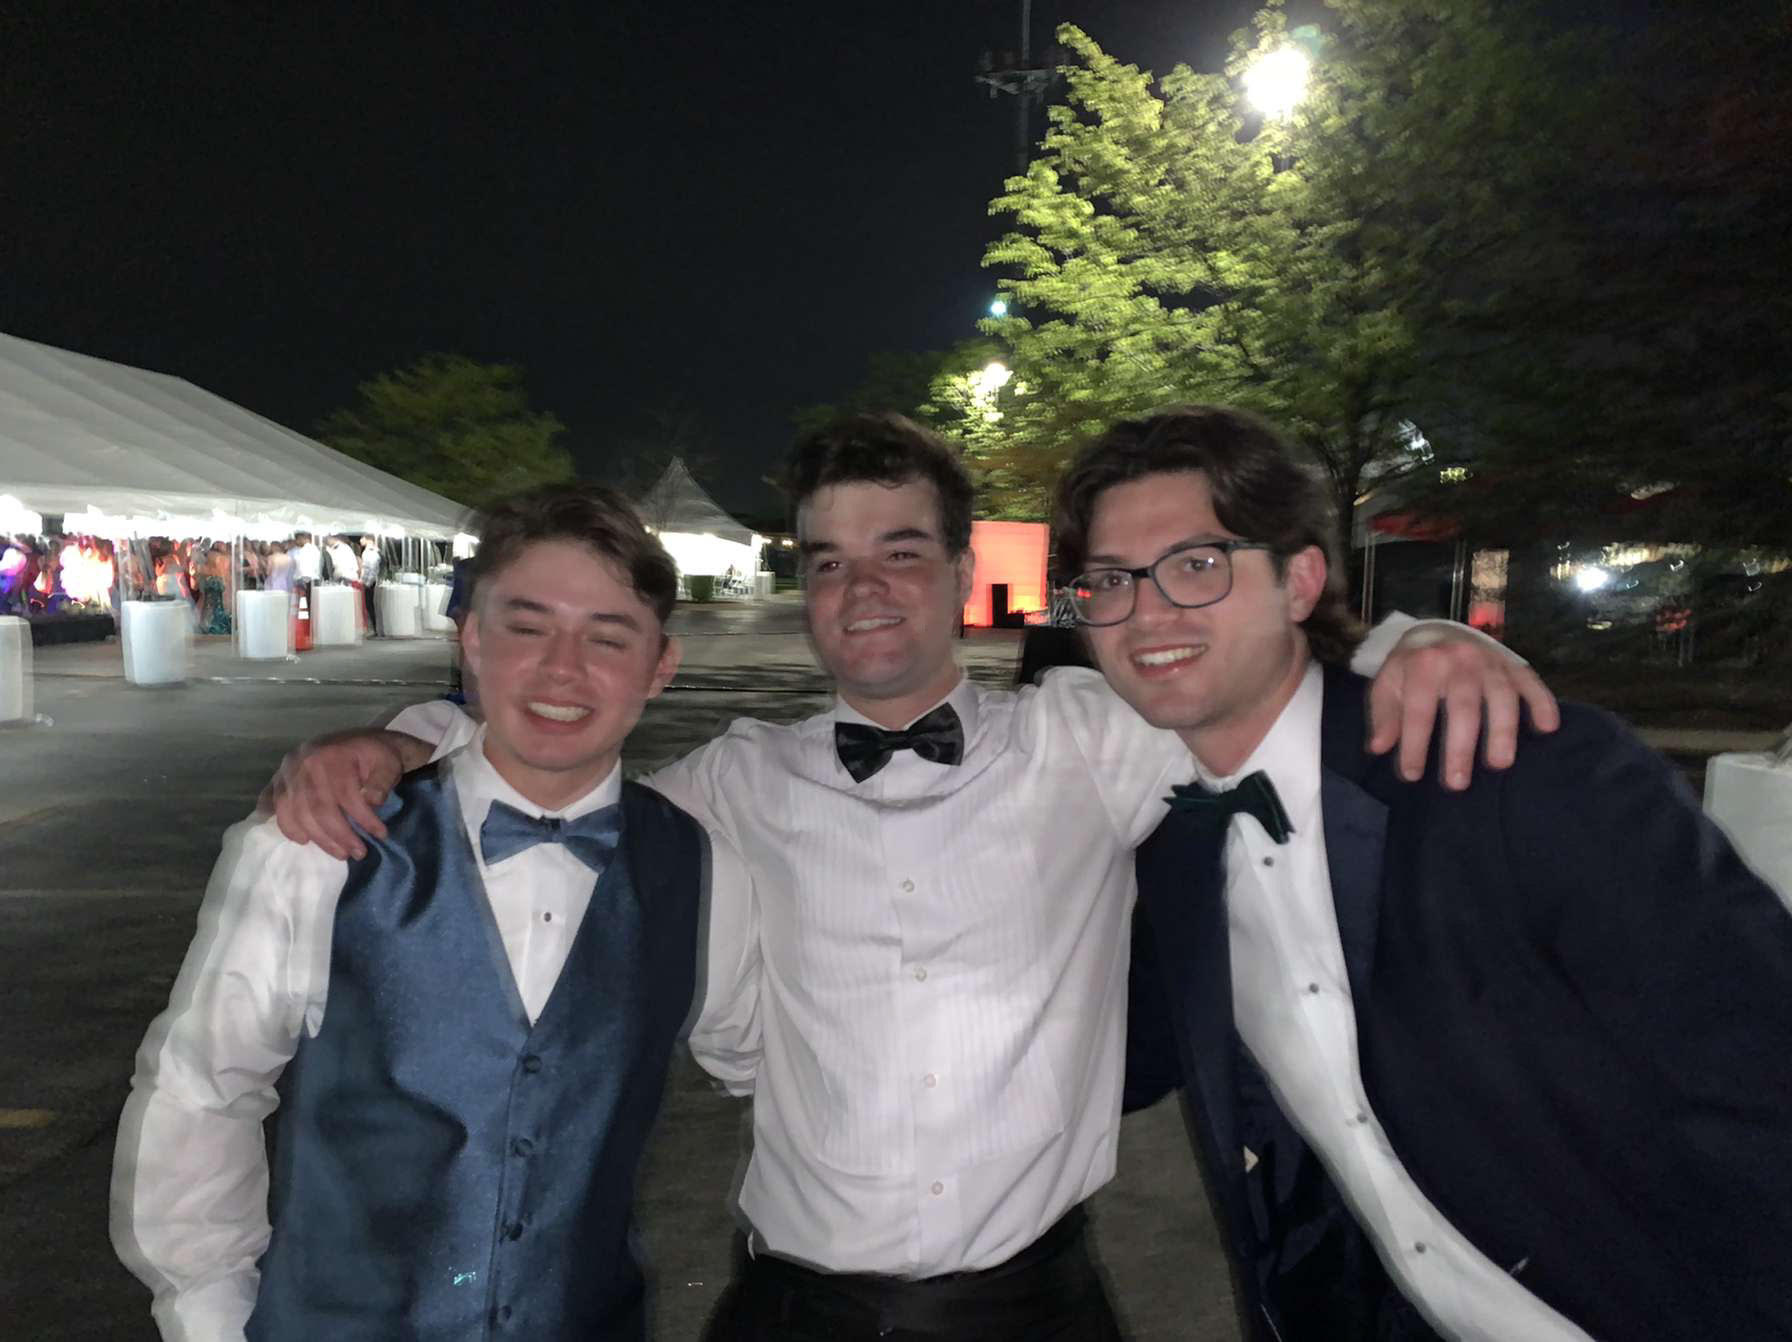 photo of Jimmy and his friends at prom